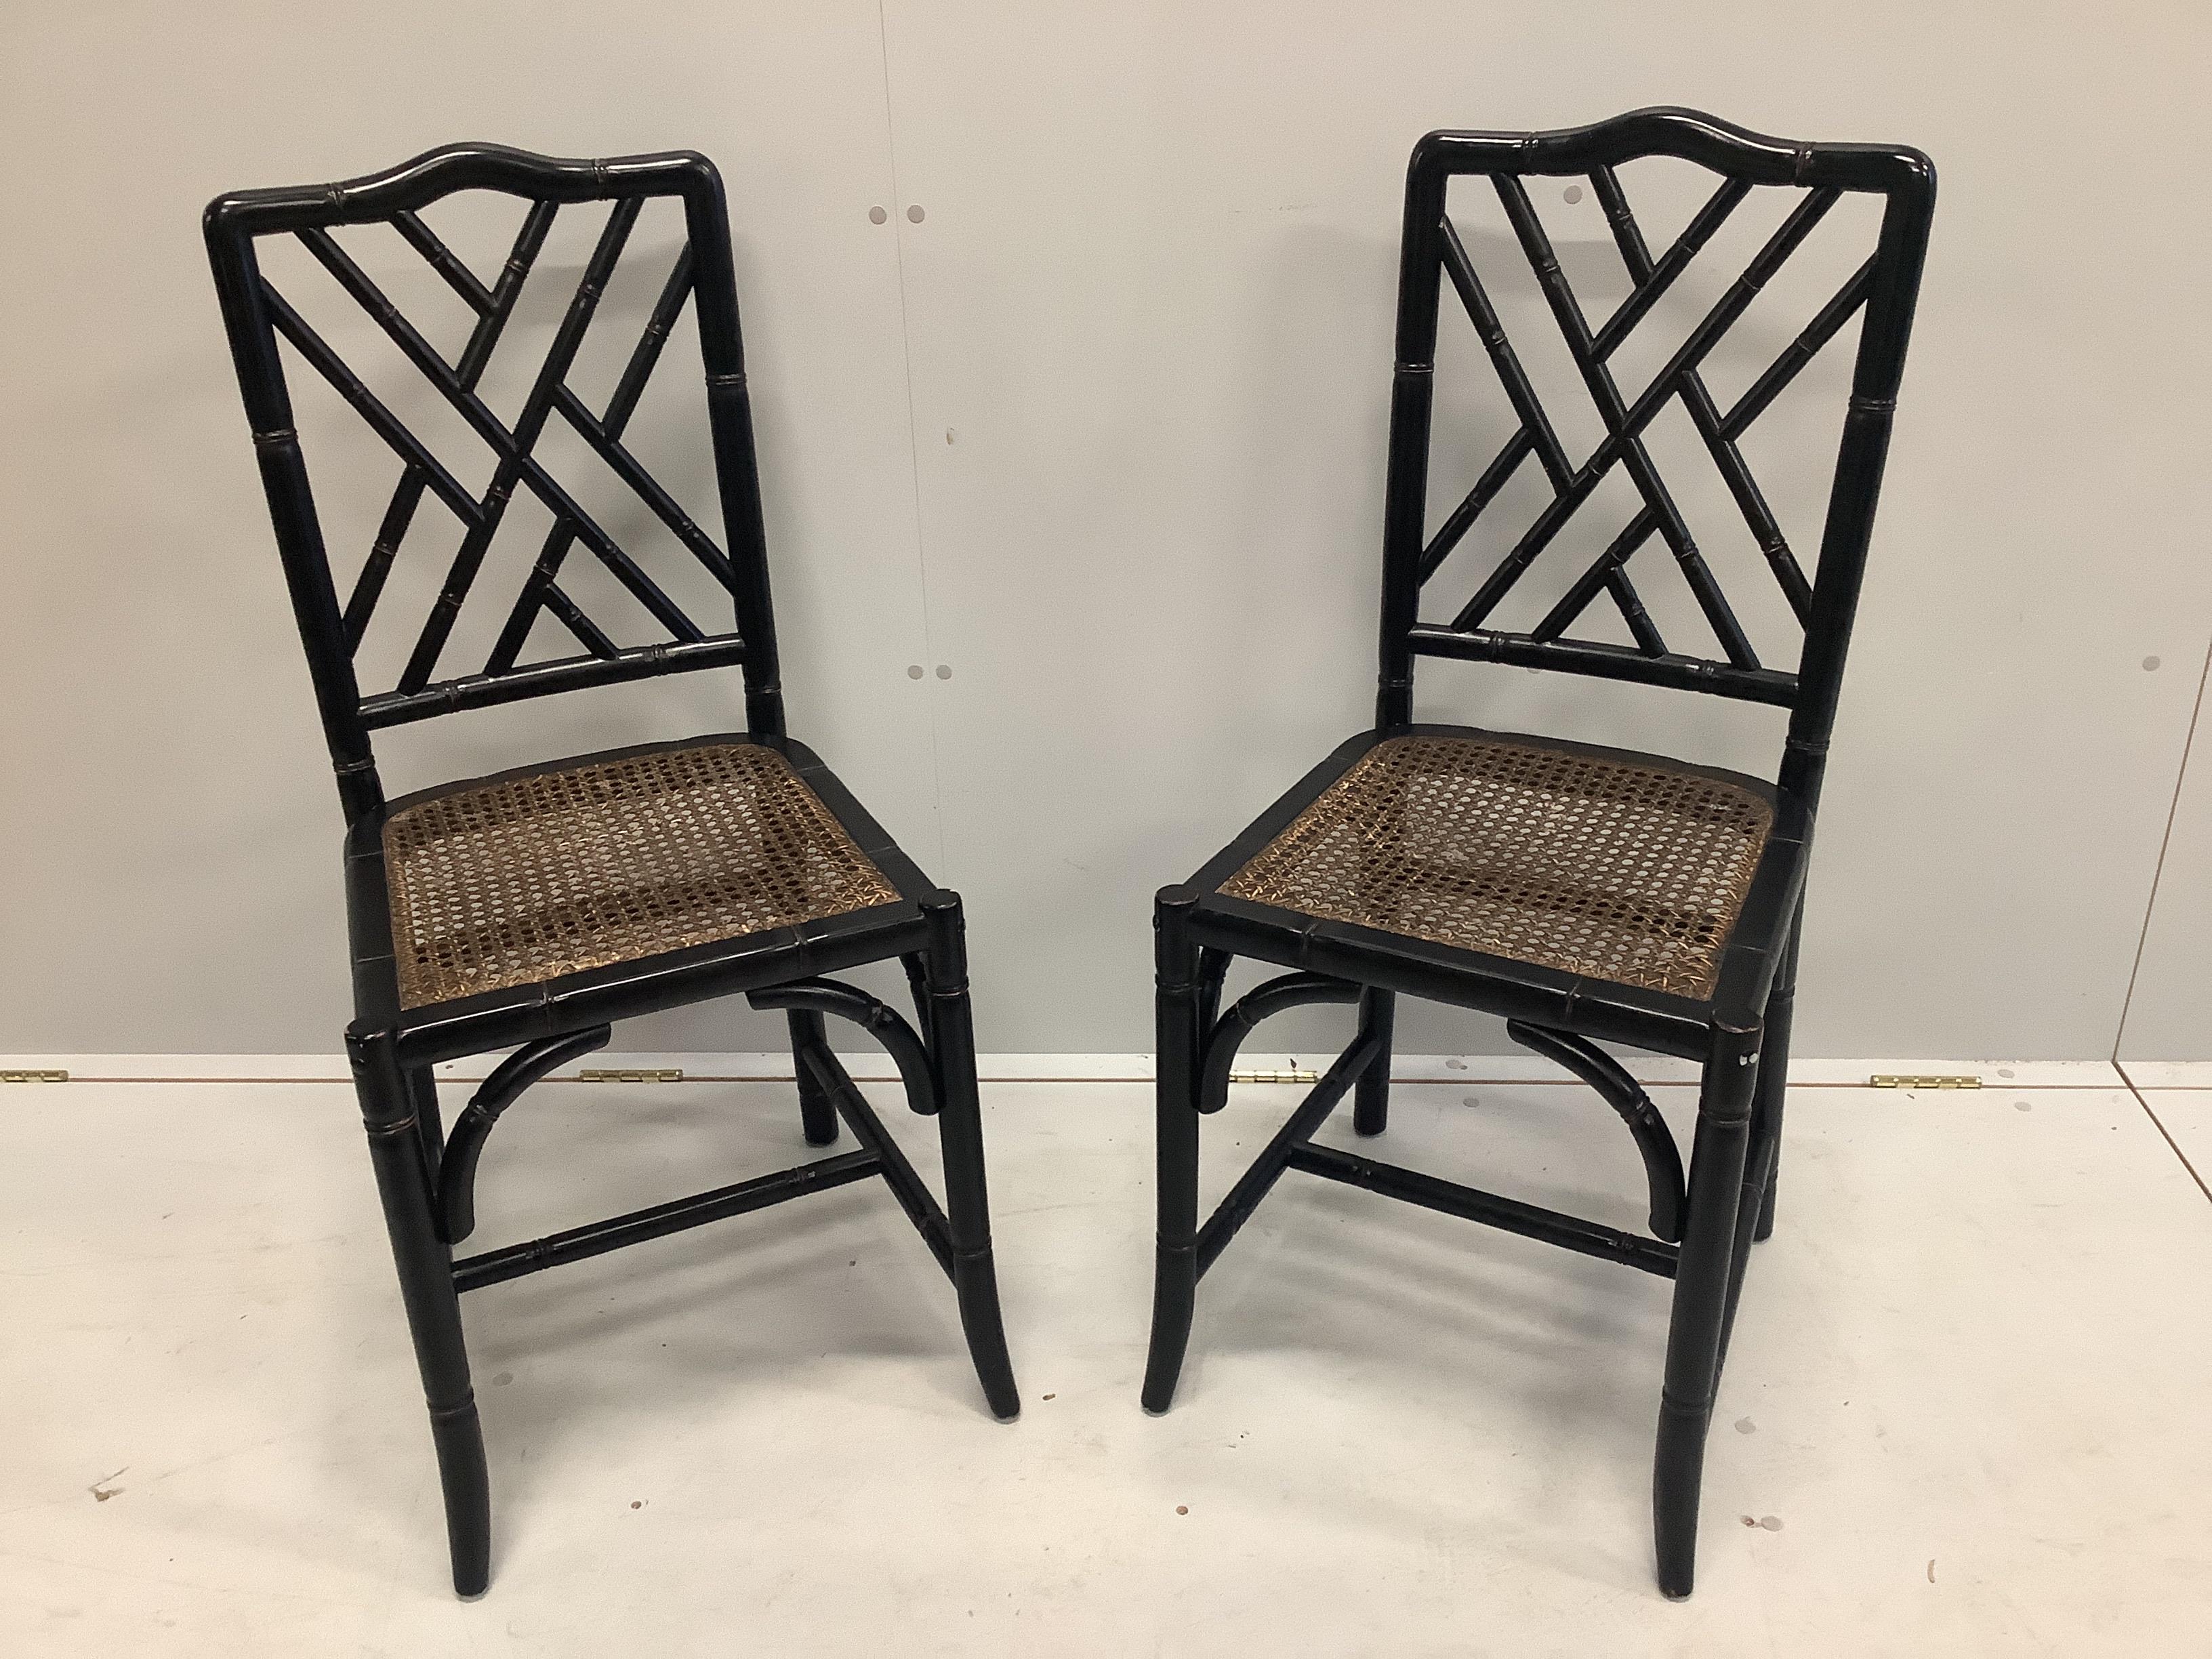 A pair of Oka style black lacquer faux bamboo cane seat dining chairs, width 43cm, depth 43cm, height 99cm